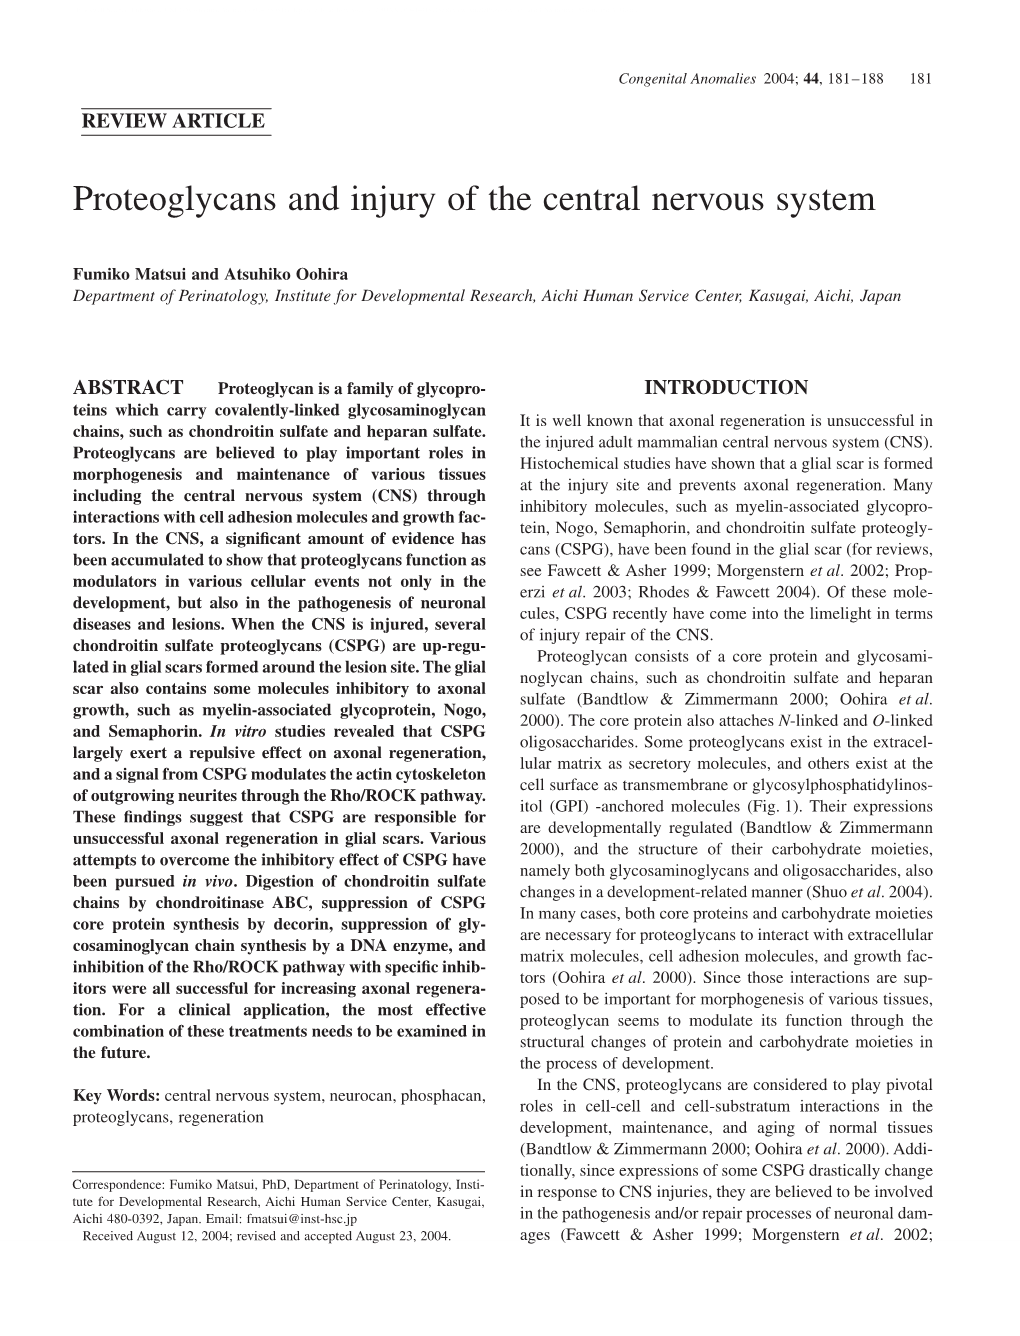 Proteoglycans and Injury of the Central Nervous System